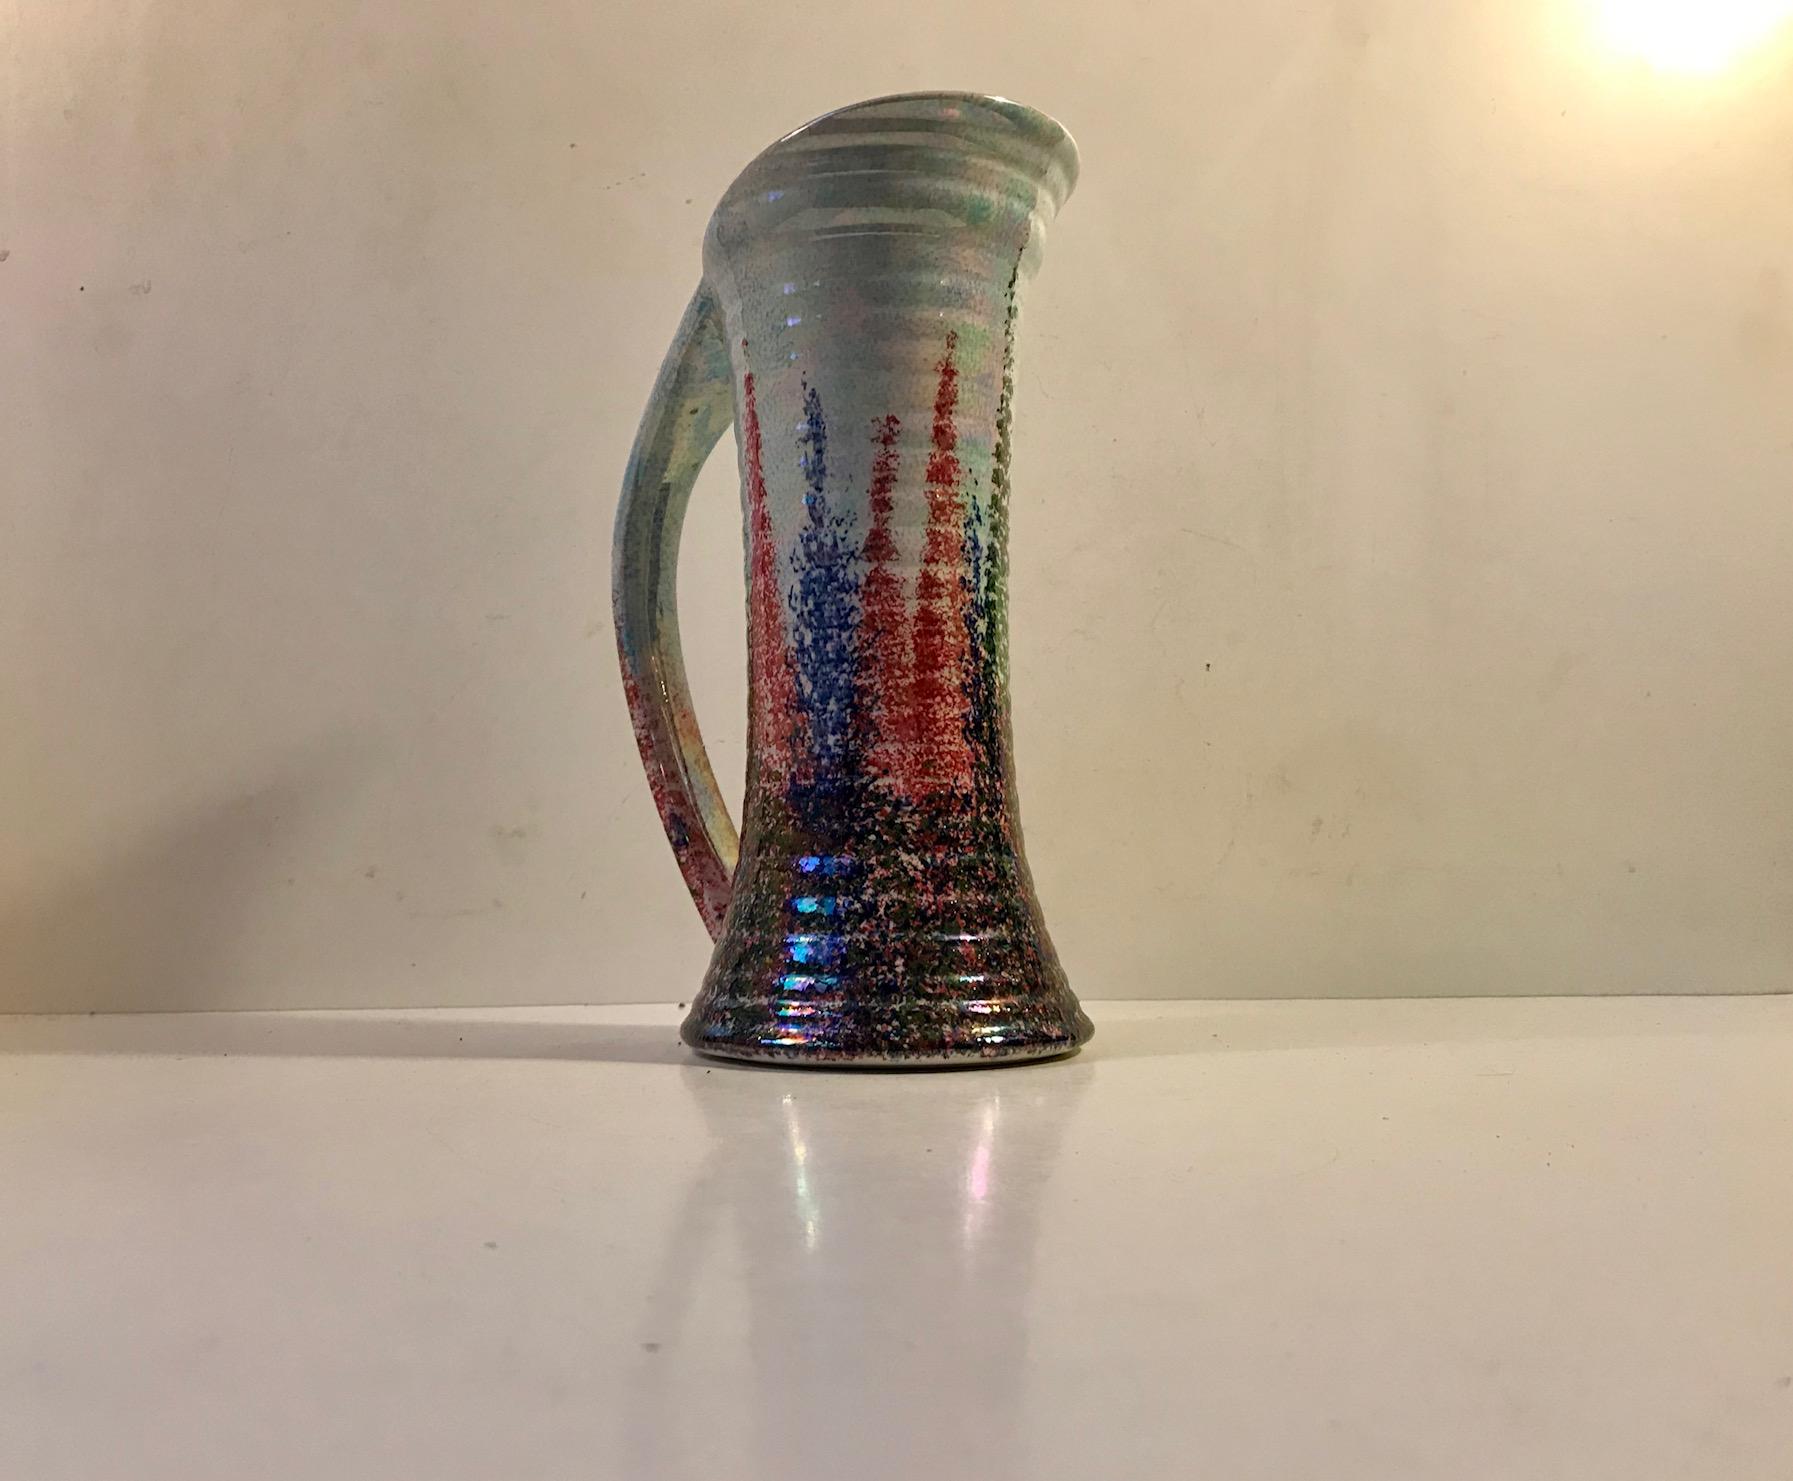 Art Deco Porcelain Pitcher with Psychedelic Lustre from Royal Art Pottery, 1930s